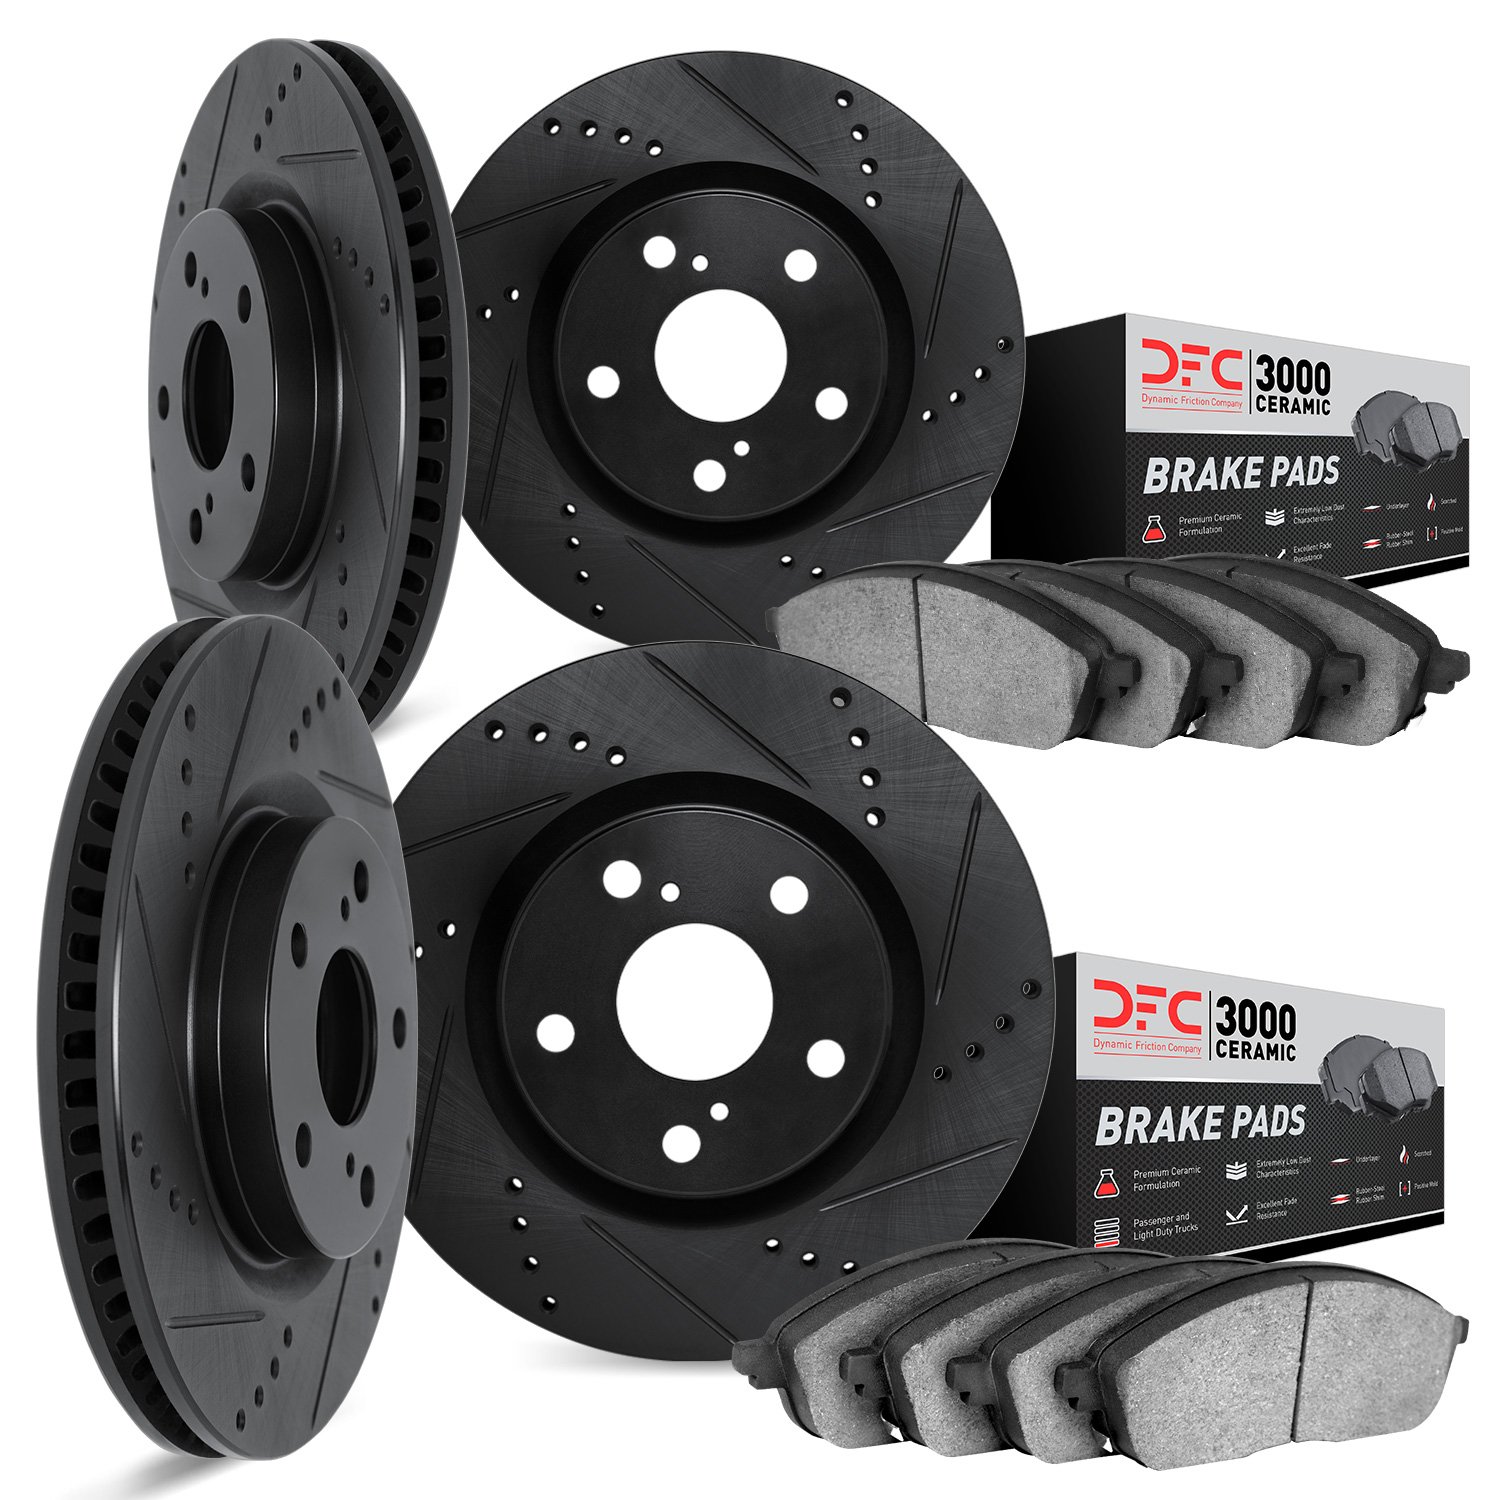 8304-31058 Drilled/Slotted Brake Rotors with 3000-Series Ceramic Brake Pads Kit [Black], 2006-2007 BMW, Position: Front and Rear